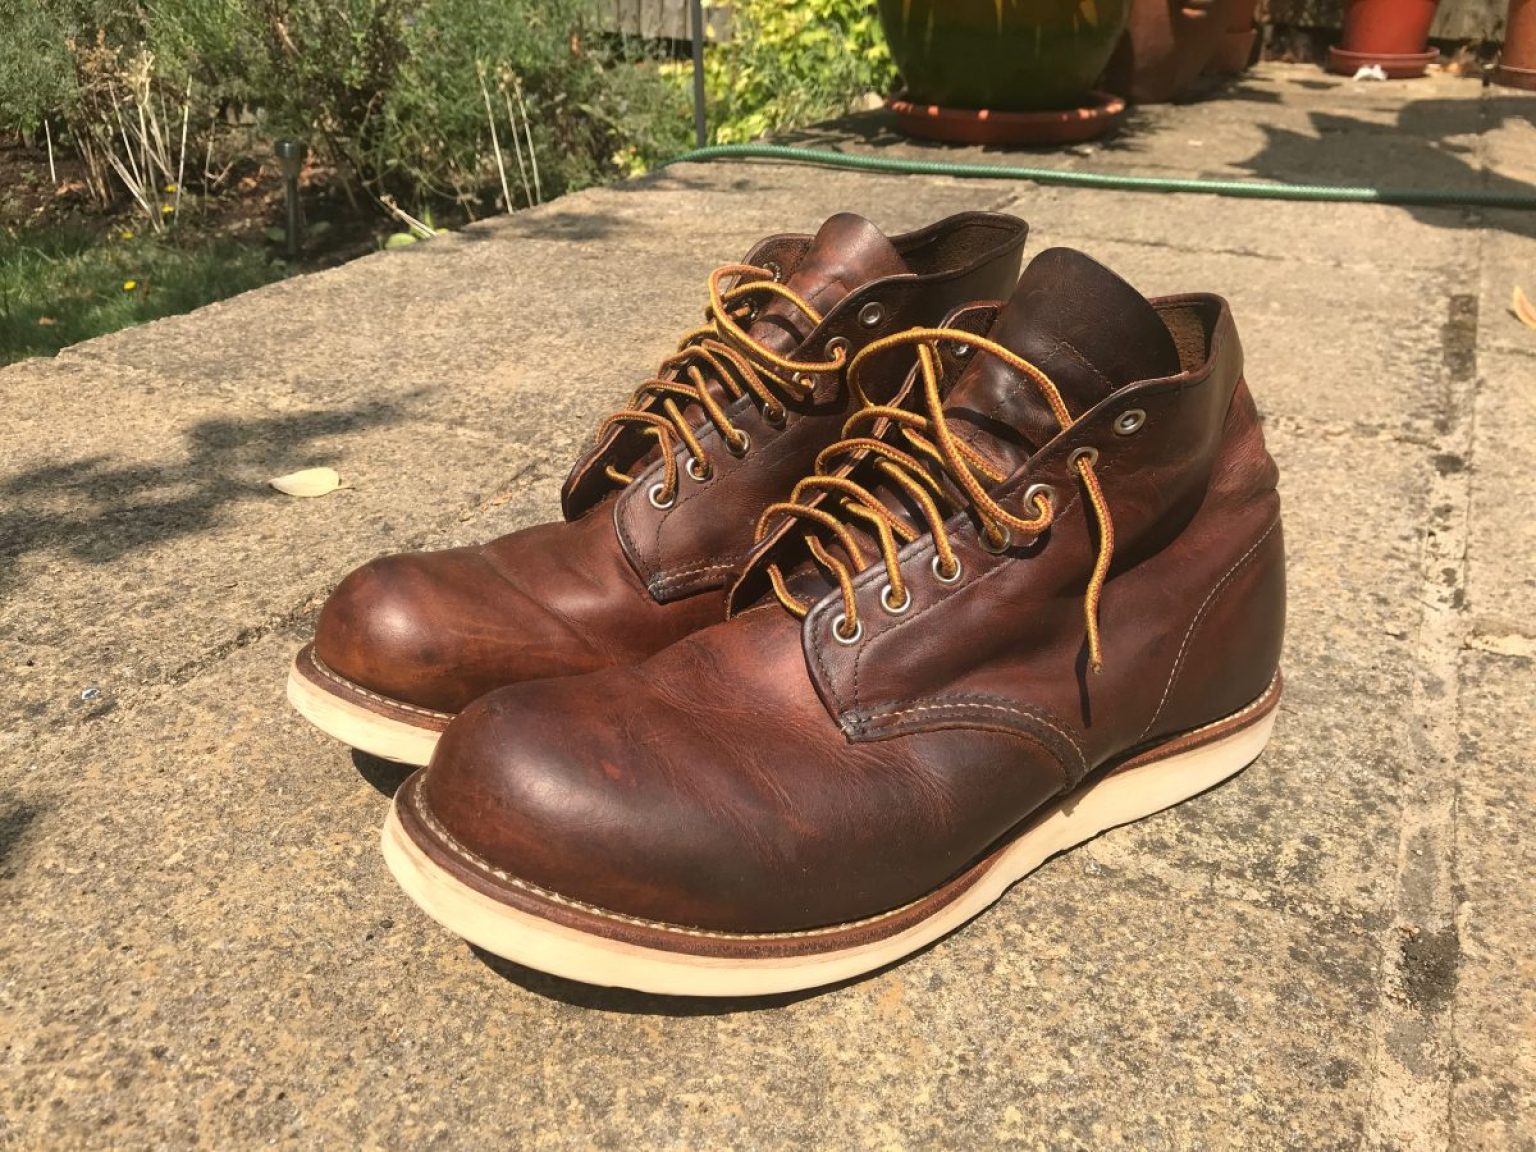 Red Wing Shoe Size Chart 1536x1152 